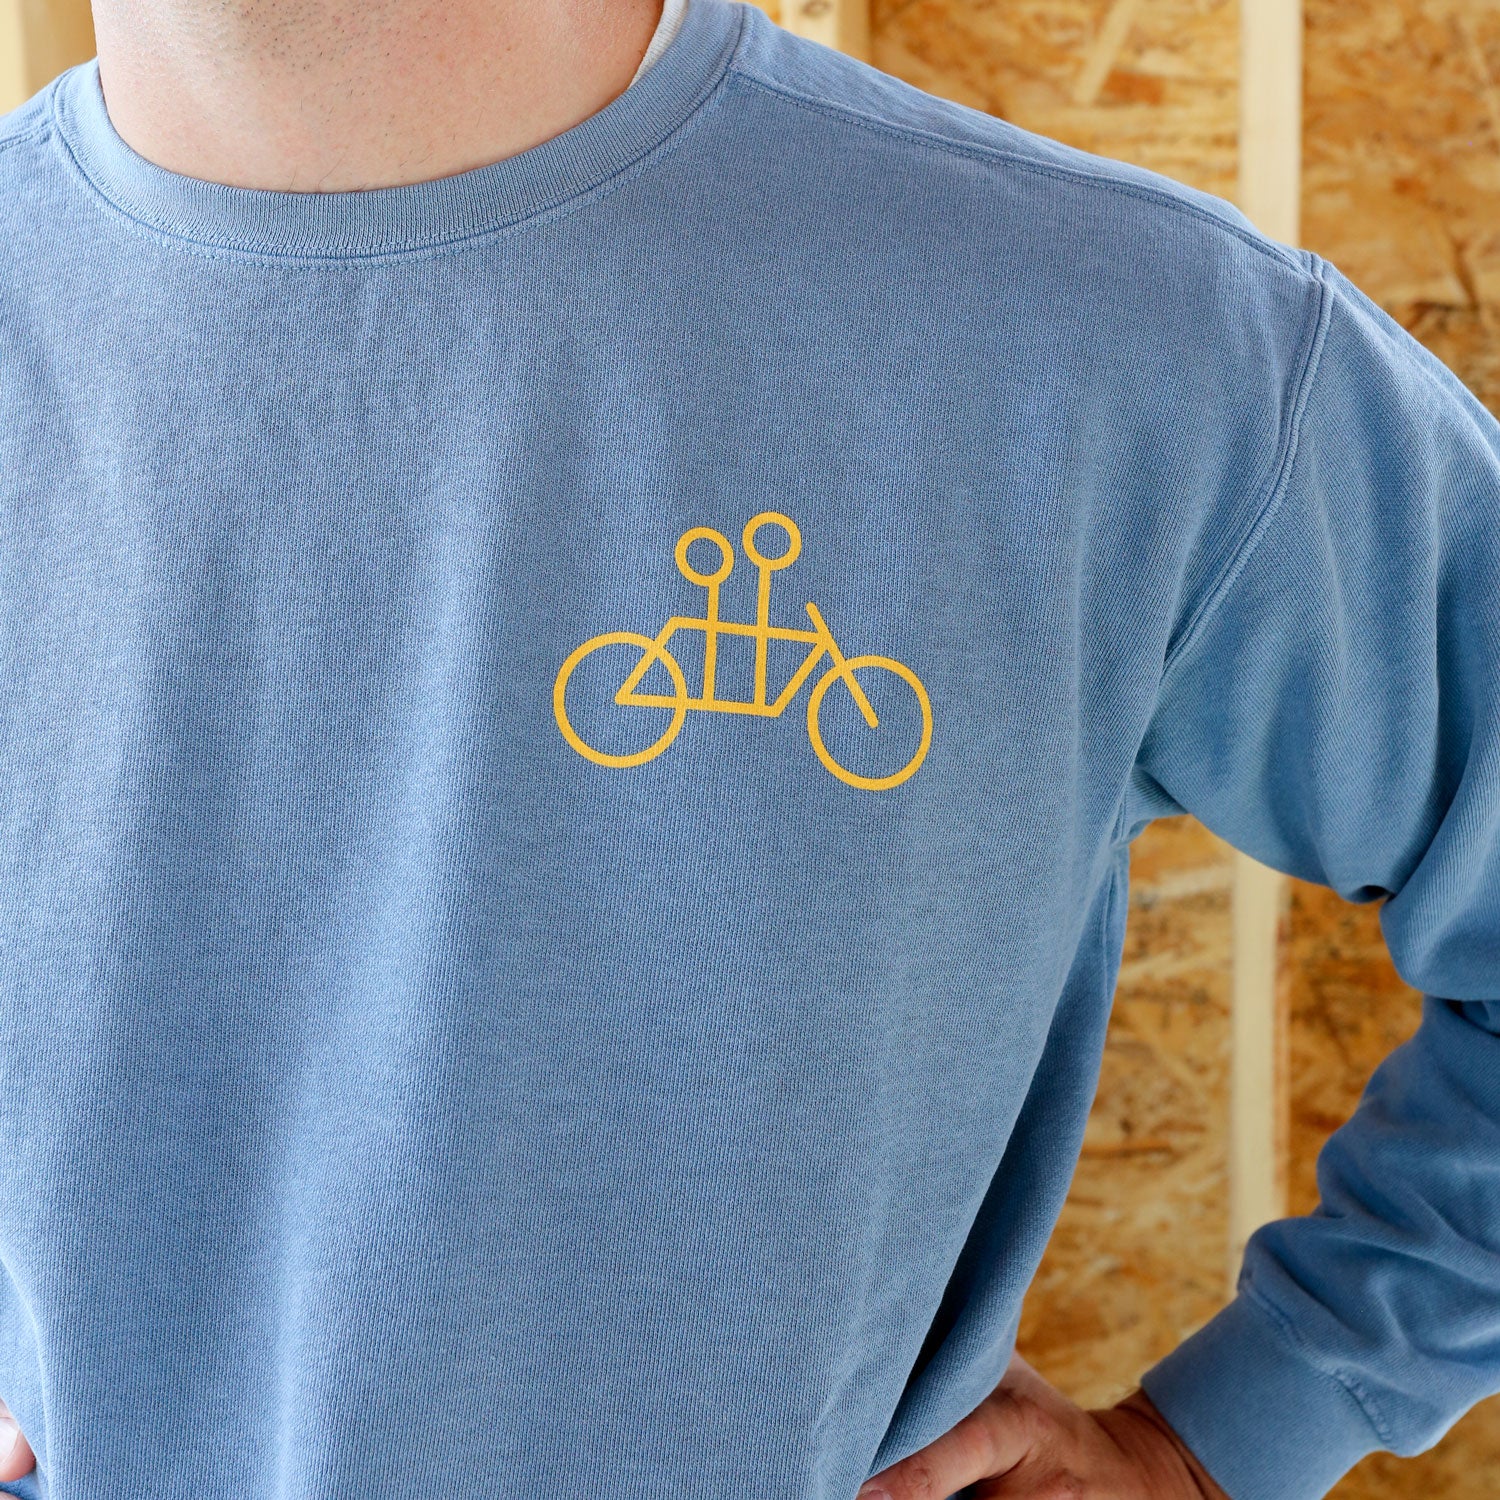 A man with a beard stands smiling in a blue Tandem Coffee Roasters crewneck sweatshirt with a Tandem Coffee bicycle logo, in front of a plywood wall in a construction site setting.